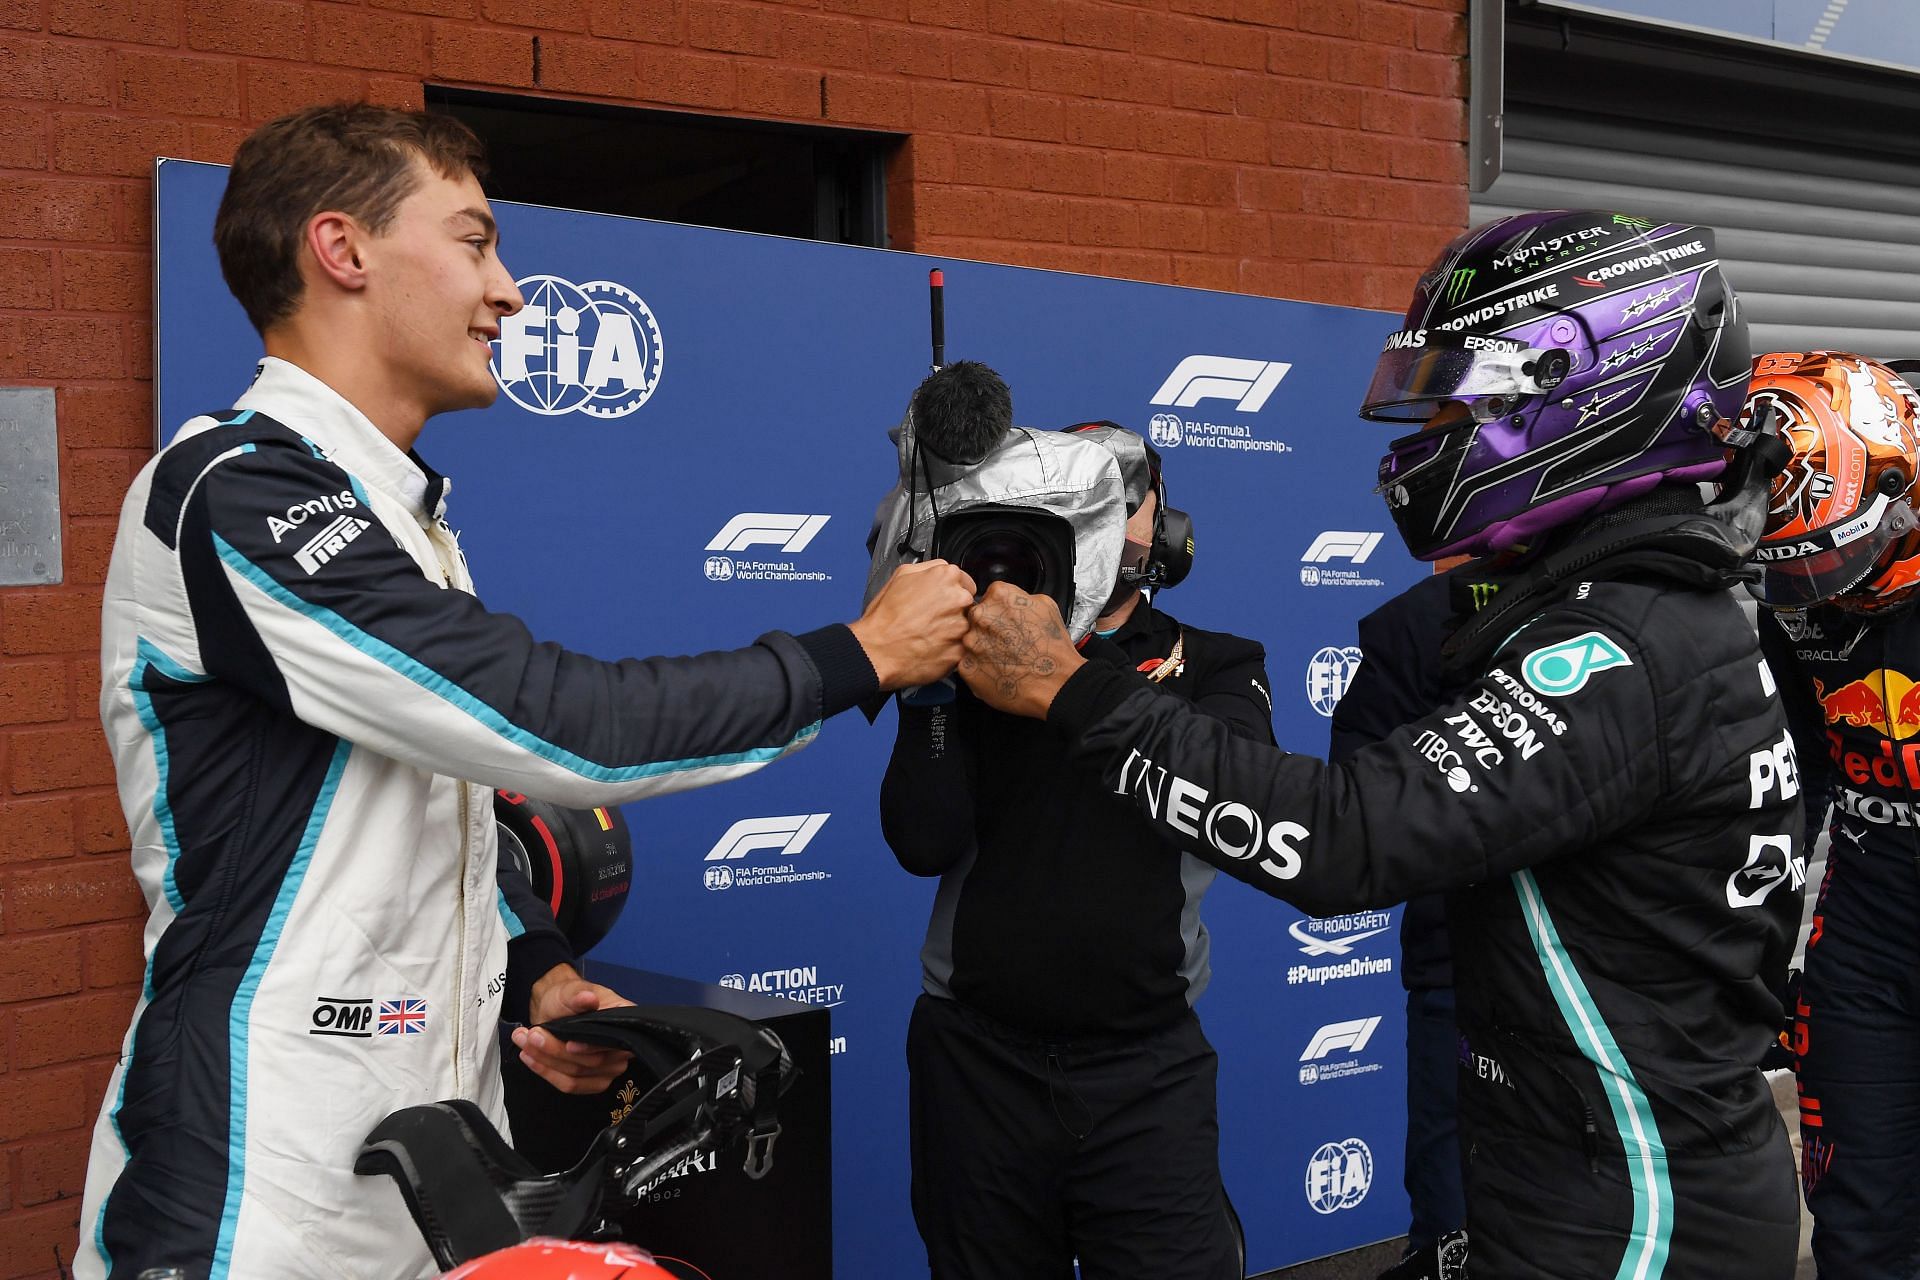 George Russell (left) and Lewis Hamilton (right) at the 2021 Belgian Grand Prix. (Photo by John Thys - Pool/Getty Images)